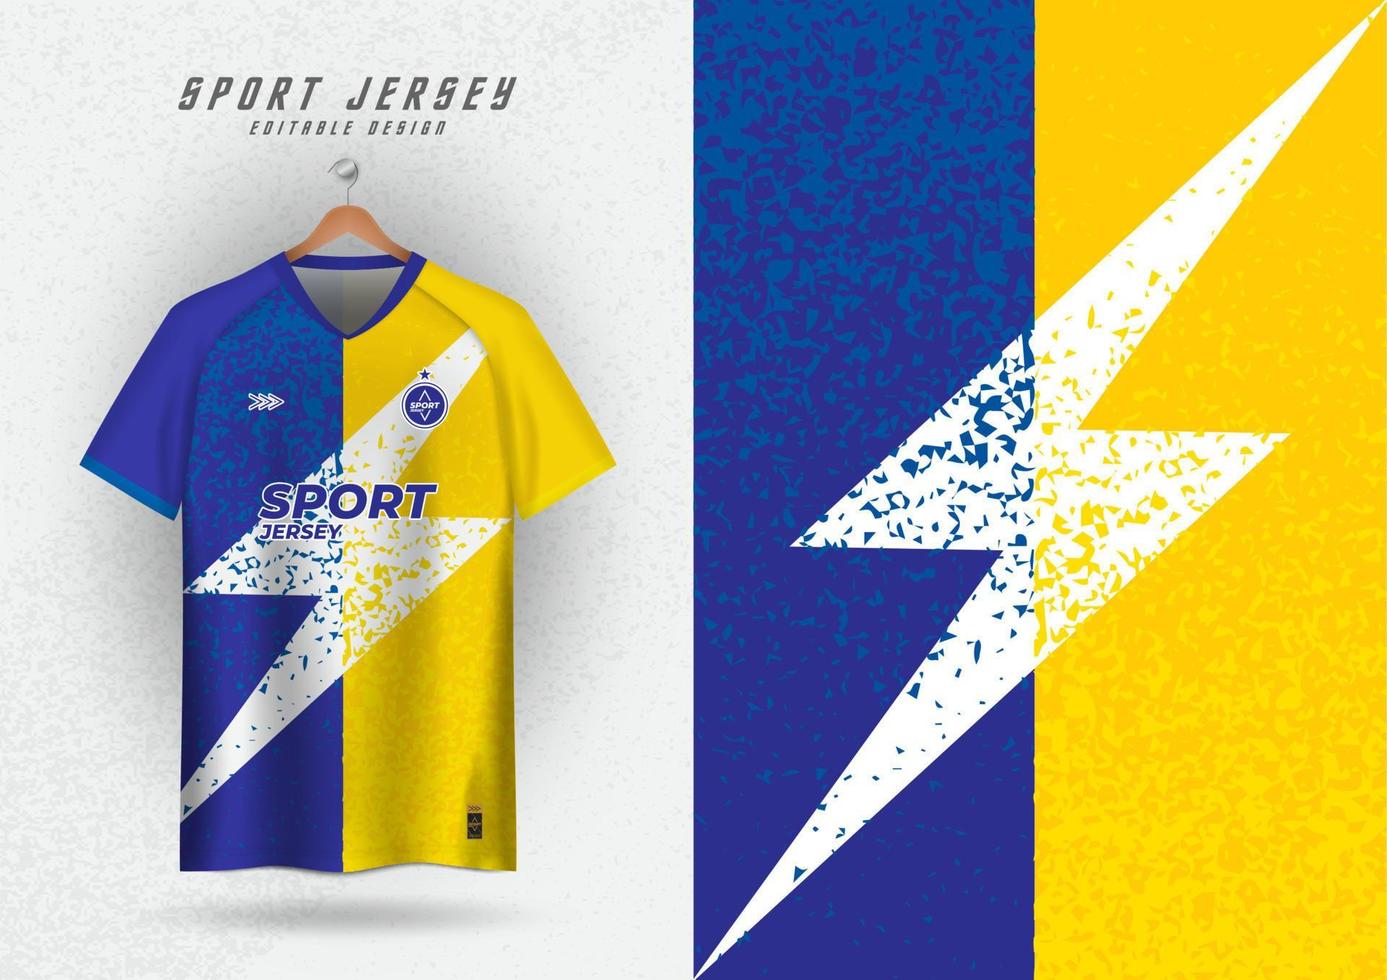 background for sports jersey soccer jersey running jersey racing jersey grain pattern blue yellow stripes vector